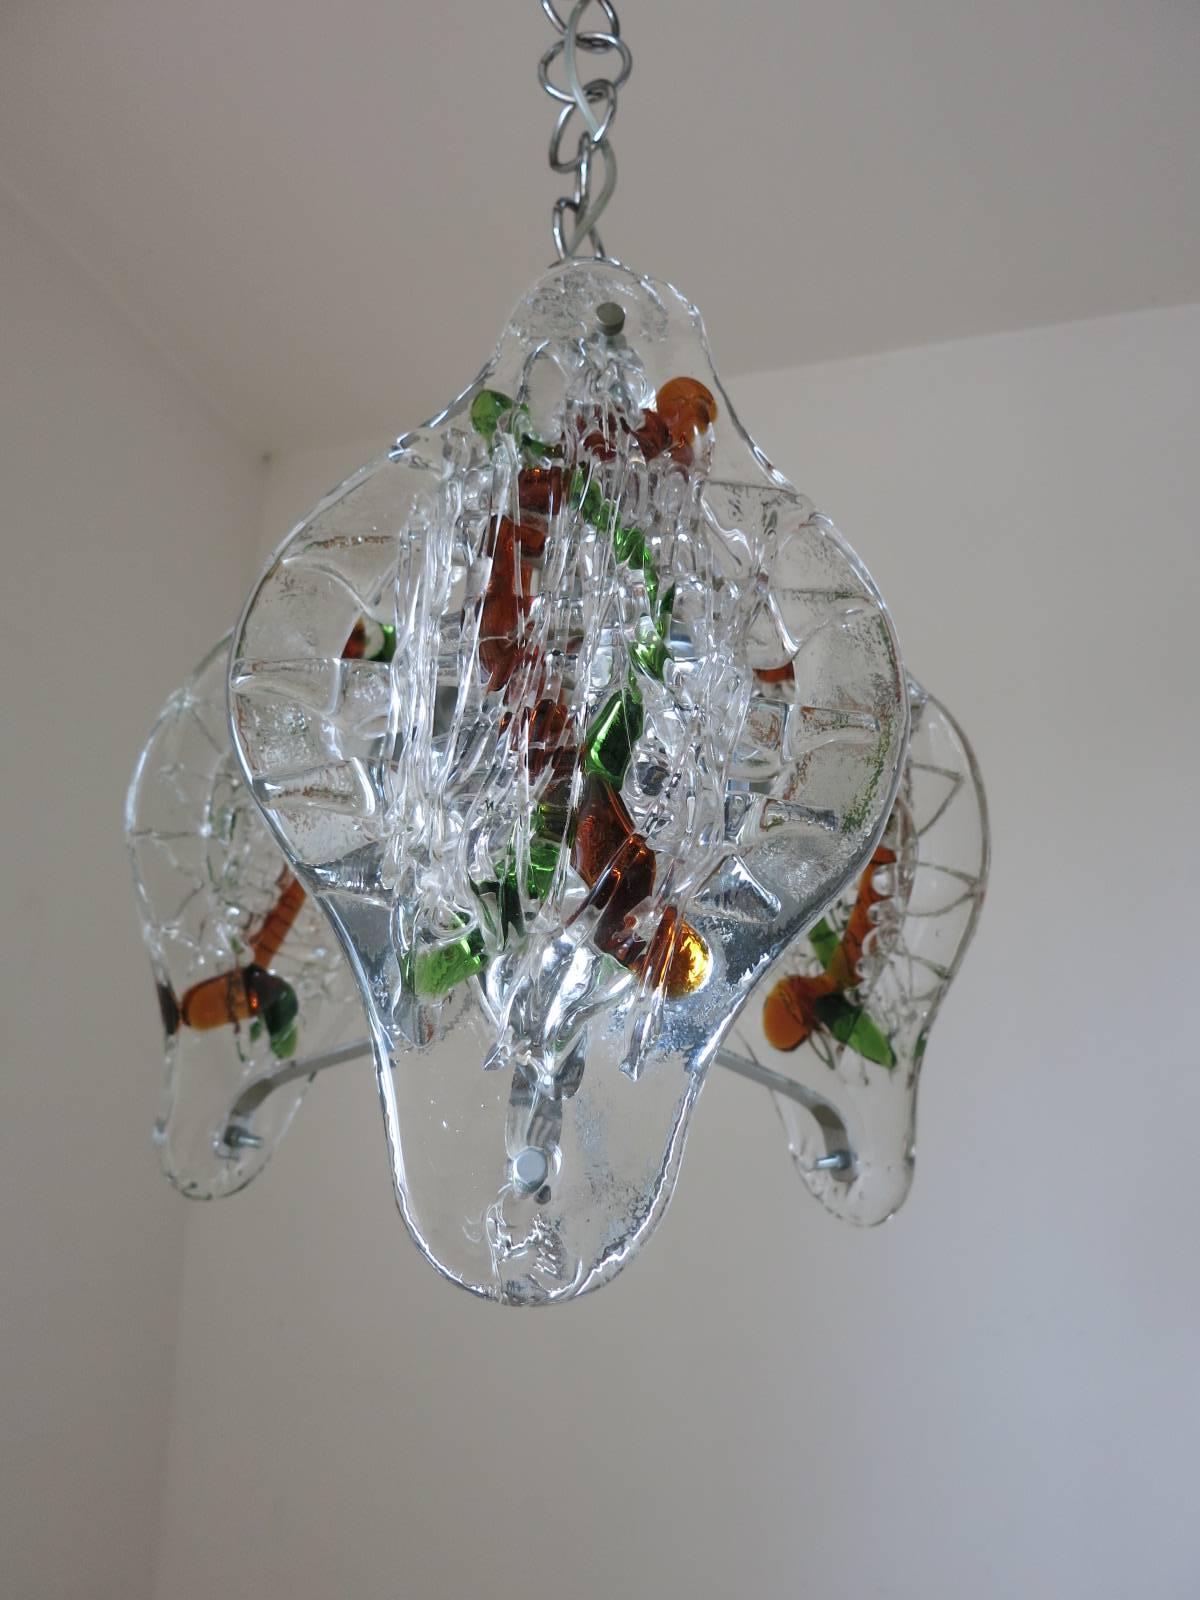 Vintage Italian pendant with clear Murano glass shields with infused green and amber patterns and hand blown with textured design, mounted on chrome frame / Designed by Mazzega circa 1960’s / Made in Italy
3 lights / E12 or E14 type / max 40W